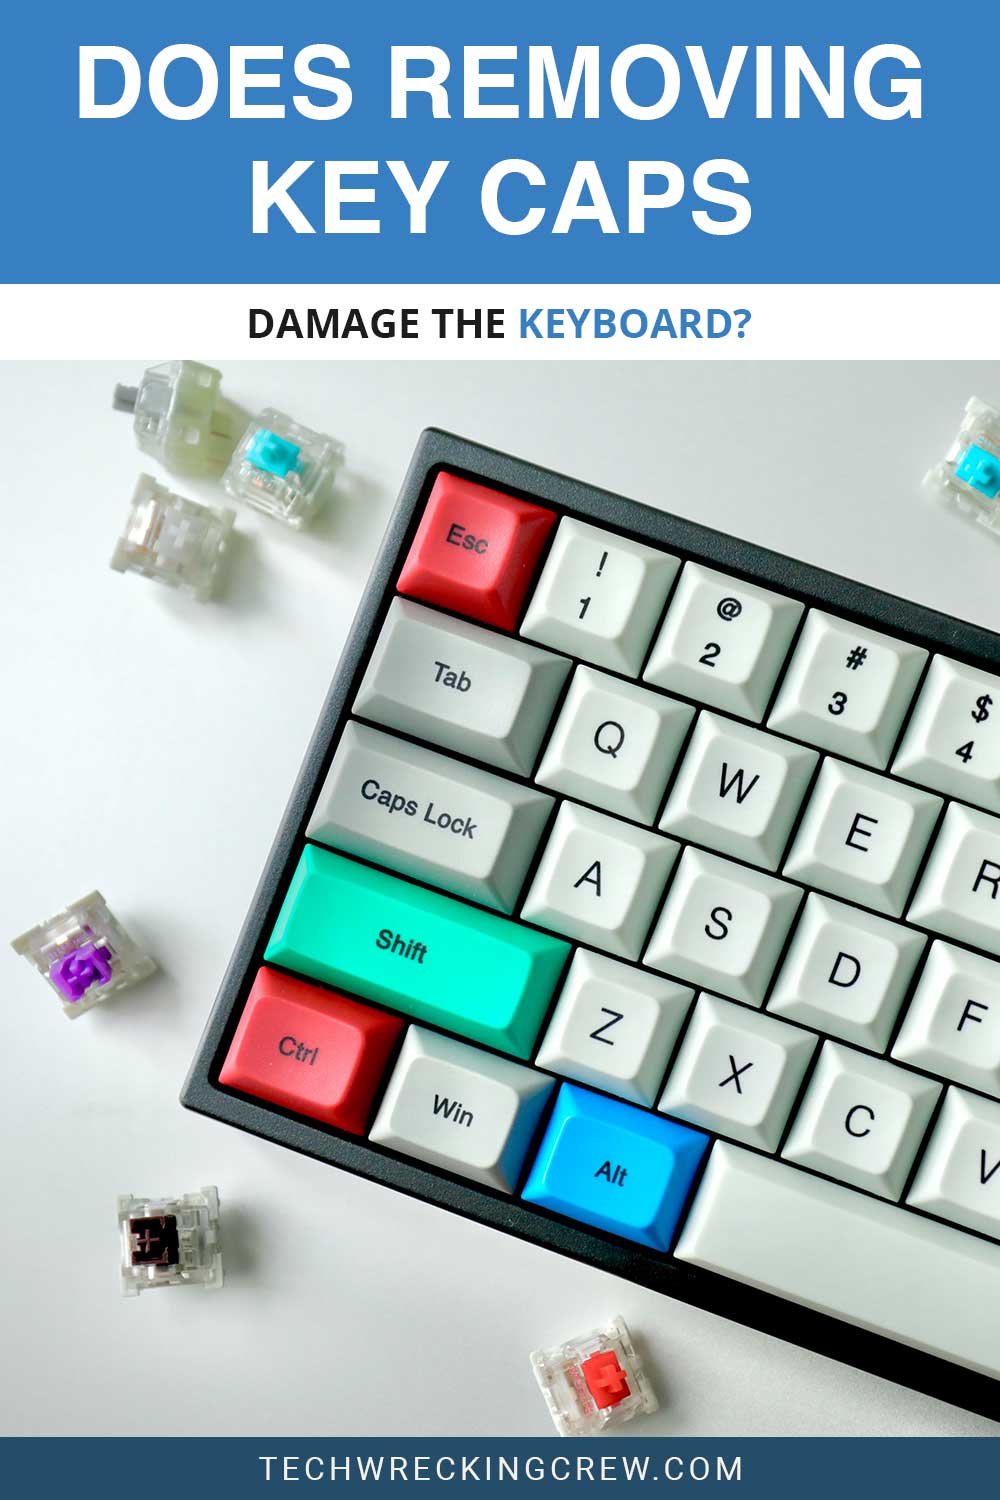 Does Removing Key Caps Damage the Keyboard?